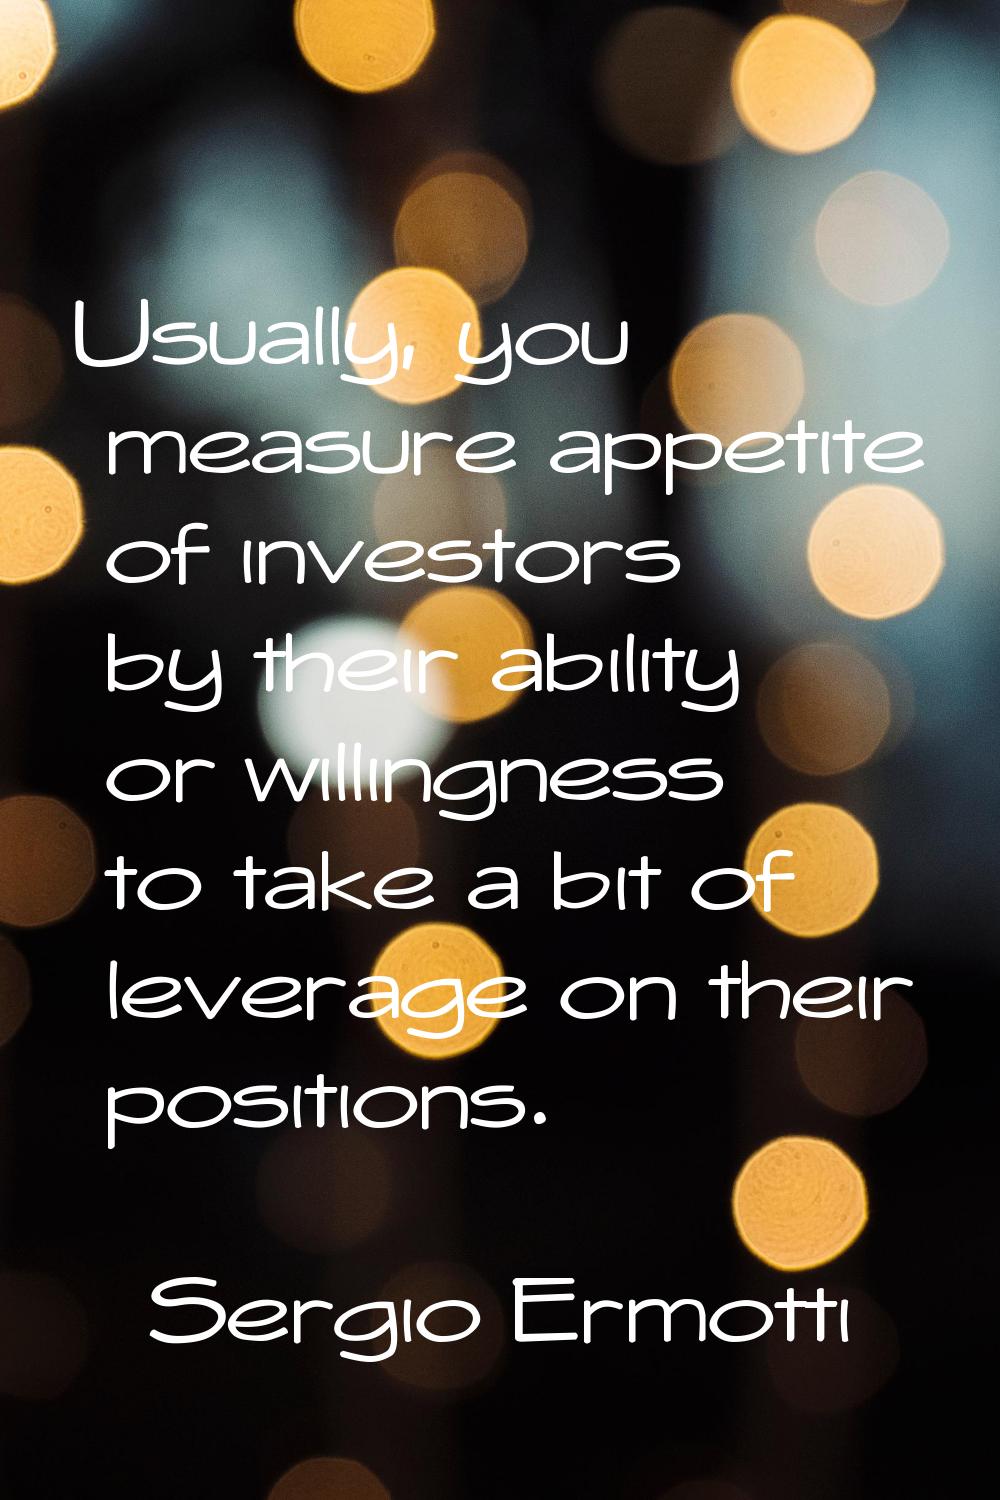 Usually, you measure appetite of investors by their ability or willingness to take a bit of leverag